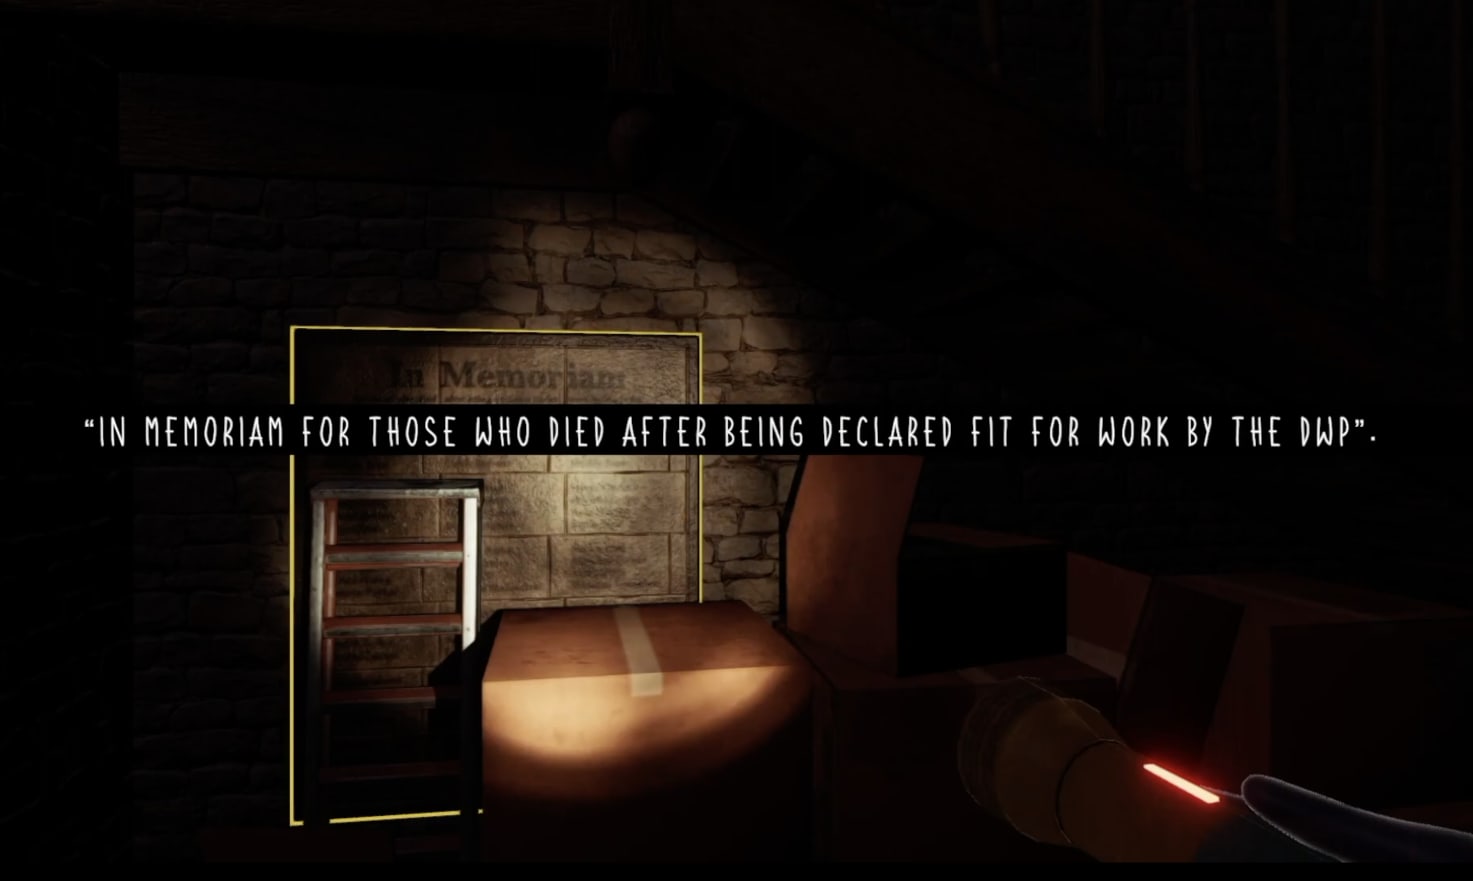 In-game screenshot showing a messy area underneath the wooden staircase. Surrounded by cardboard packing boxes and a rusty stepladder is a wall-mounted metal plaque. Text on the plaque is not particularly legible, particularly given the perspective being limited by the reach of the torchlight. The one sentence discernible reads ‘In memoriam for those who died after being declared fit for work by the DWP.’ This sentence appears as dialogue, white on black, across the centre of the image.